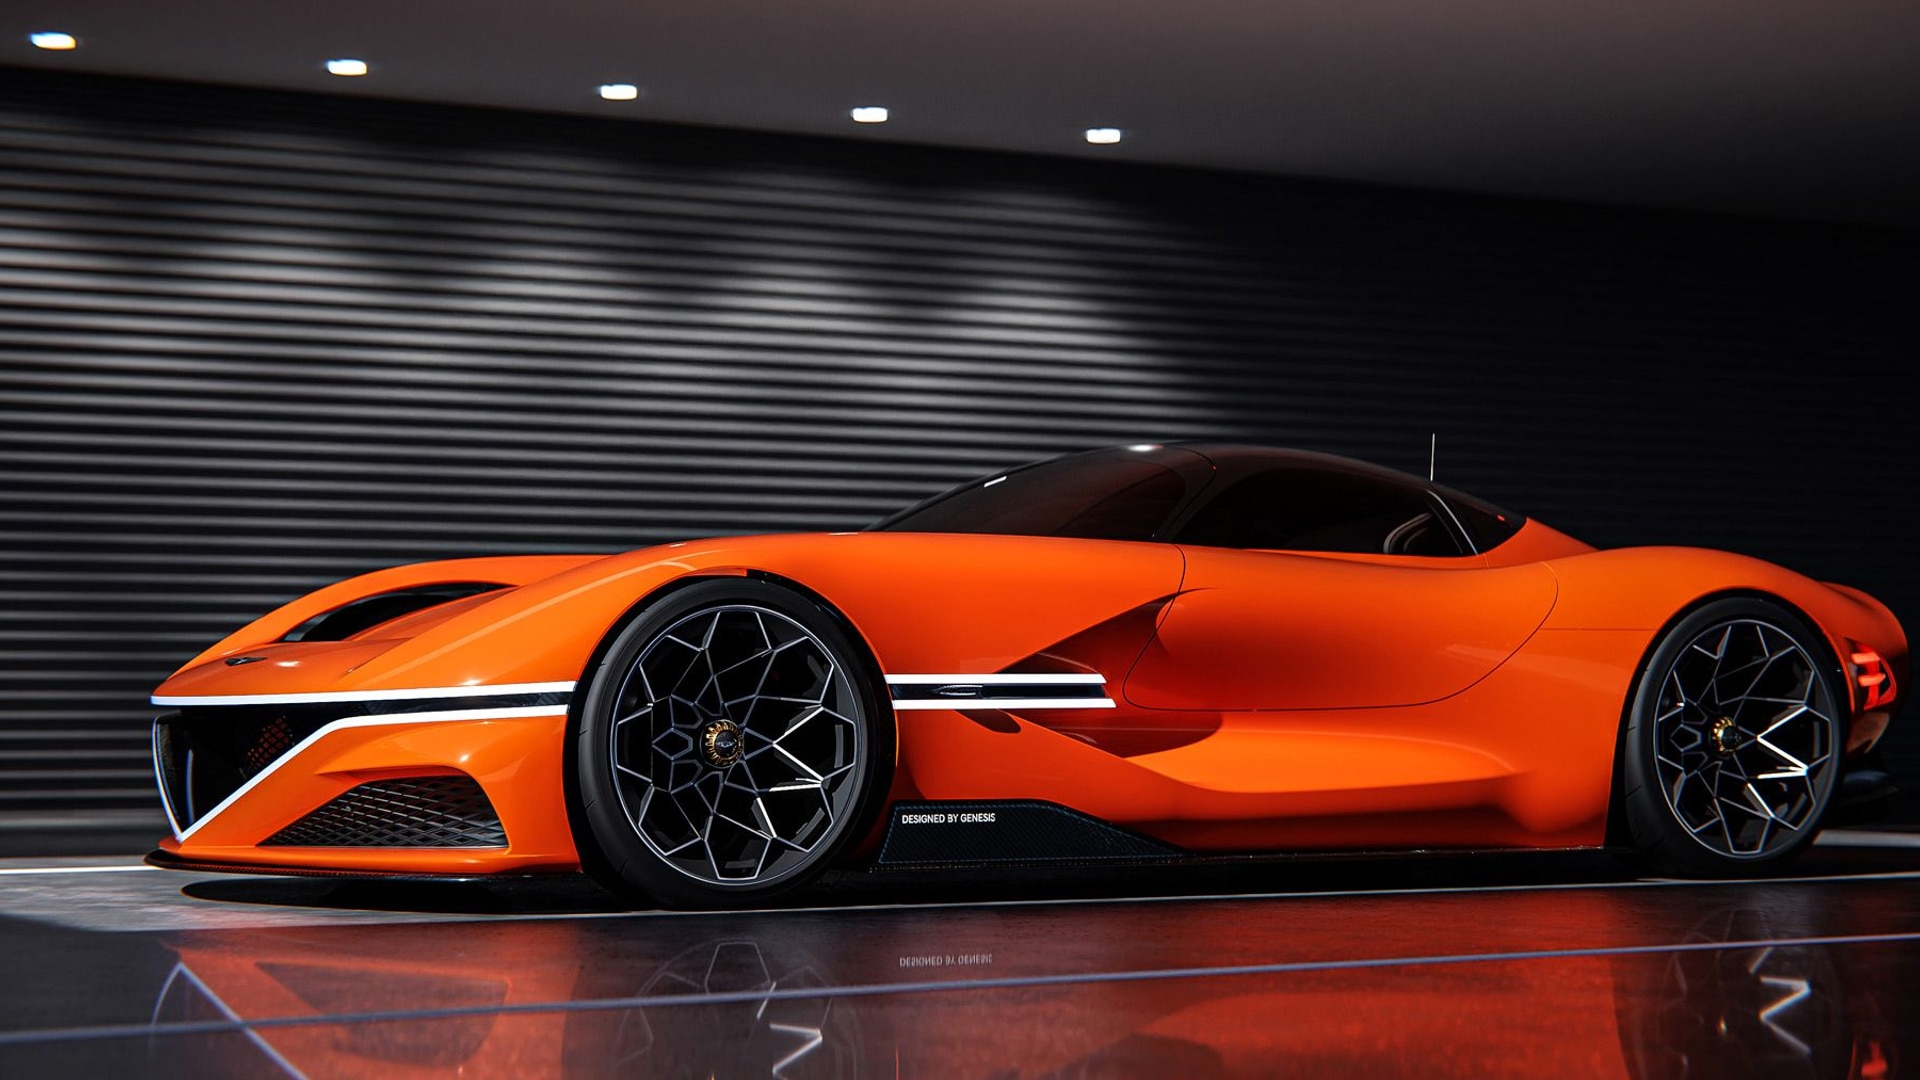 Genesis rolls out V-6 hybrid hypercar concept packing 1,071 hp